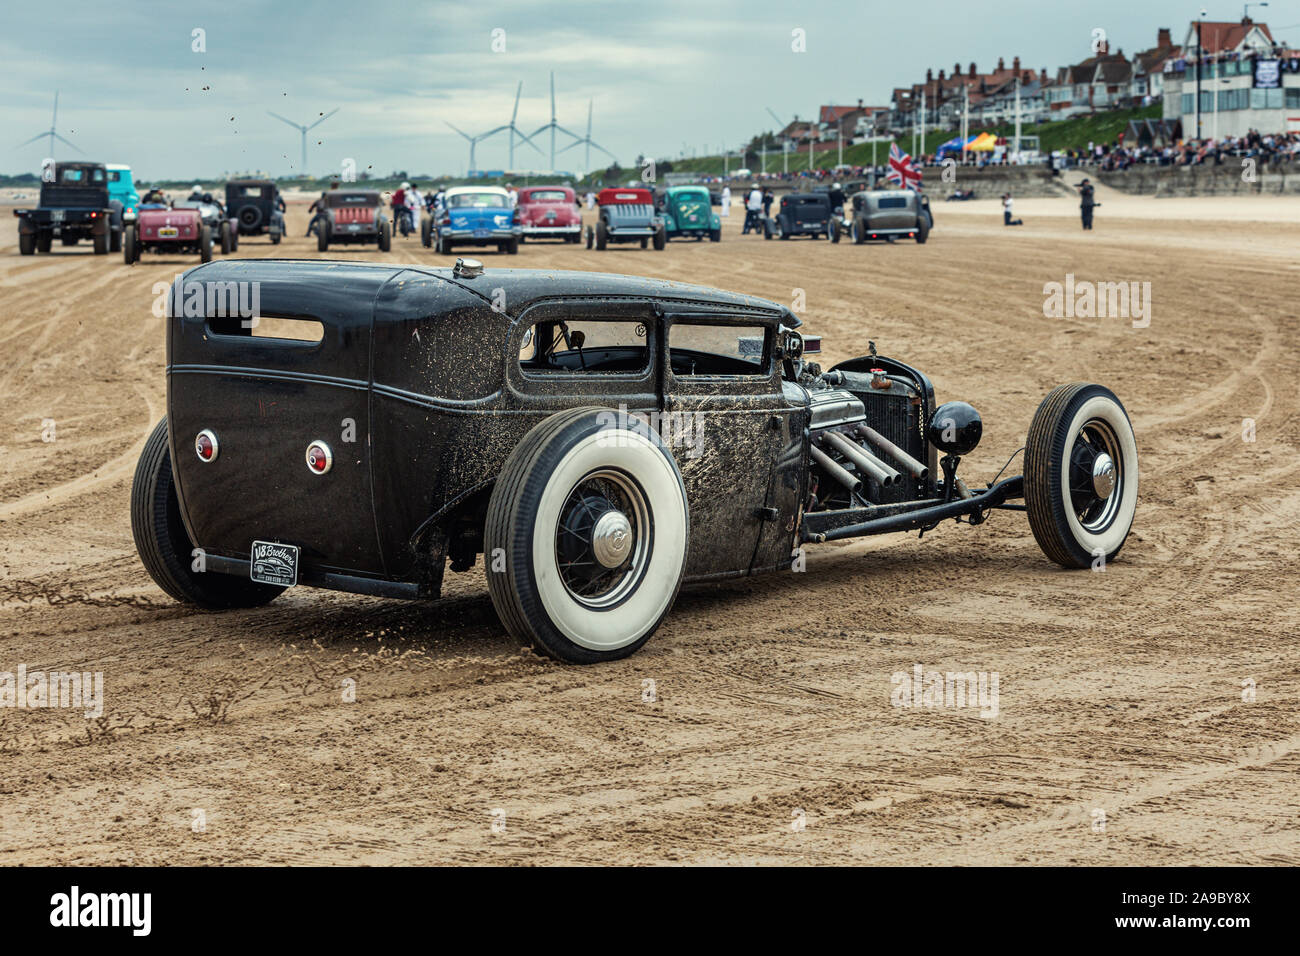 A vintage chopped hot rod at the 'Race the Waves' event, where cars and motorcycles drag race on the beach at Bridlington, East Yorkshire England UK Stock Photo